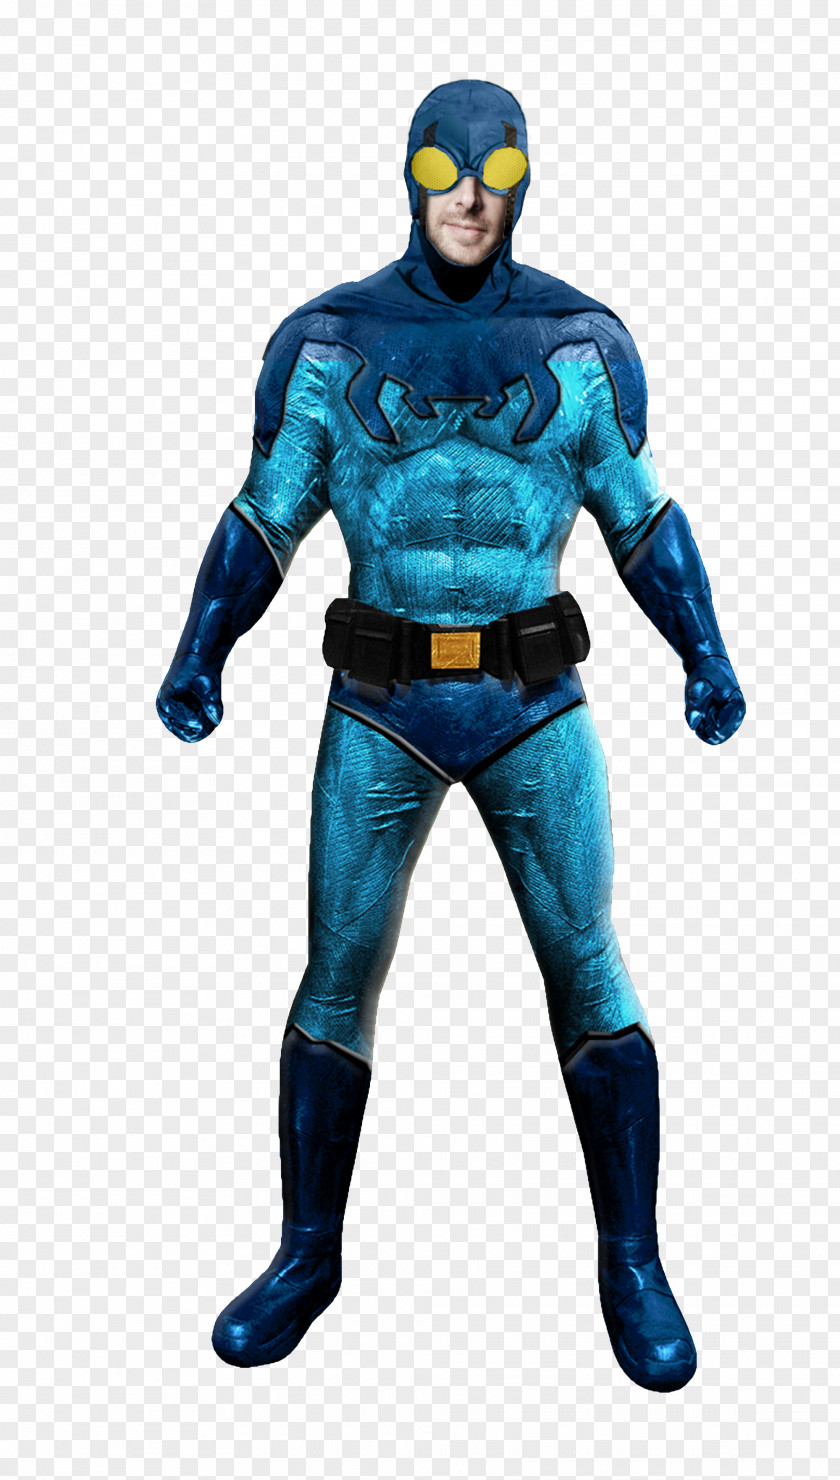 Blue Beetle Booster Gold Ted Kord Superhero Lex Luthor PNG